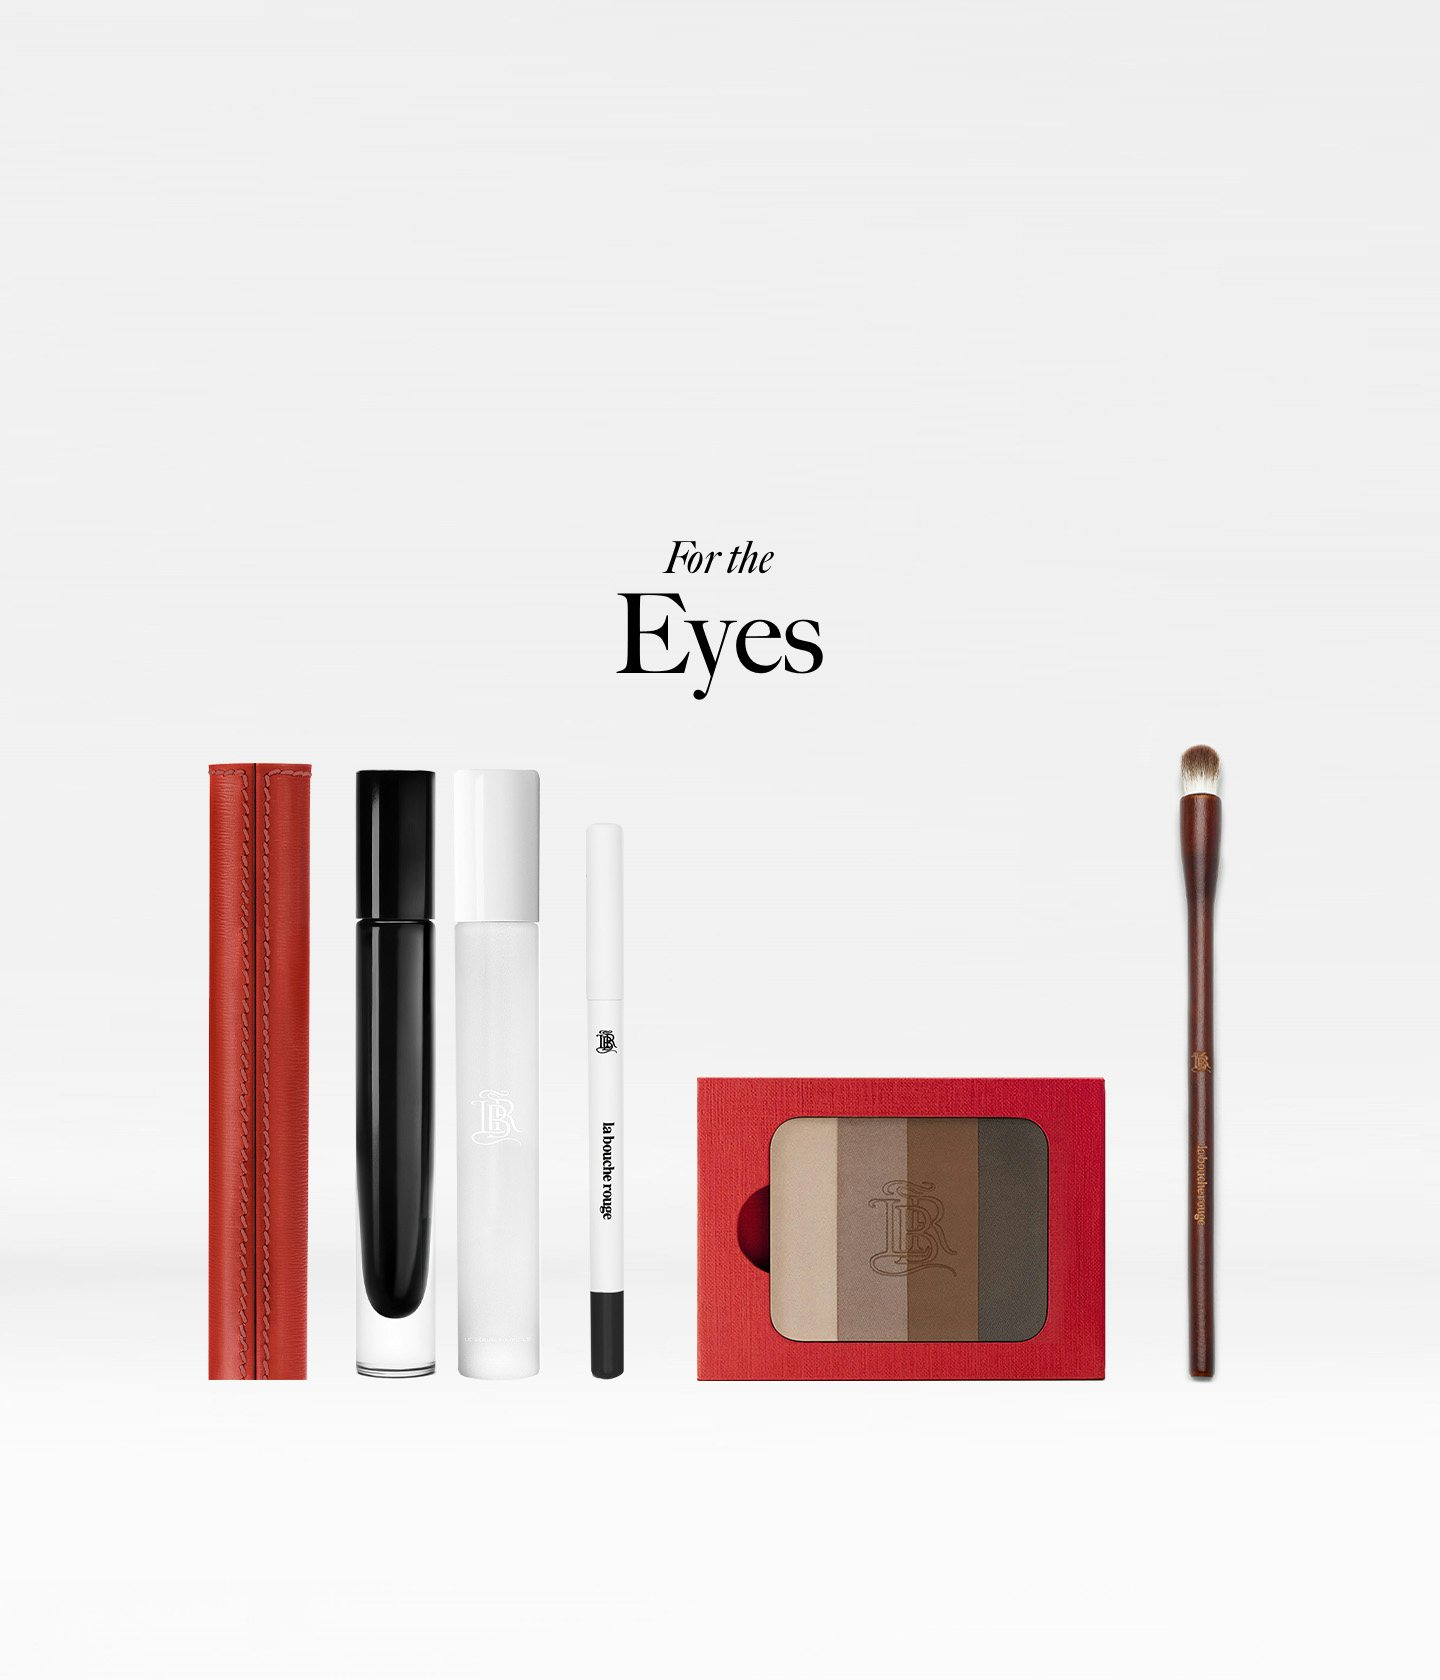 La bouche rouge Makeup Collection for the eyes products